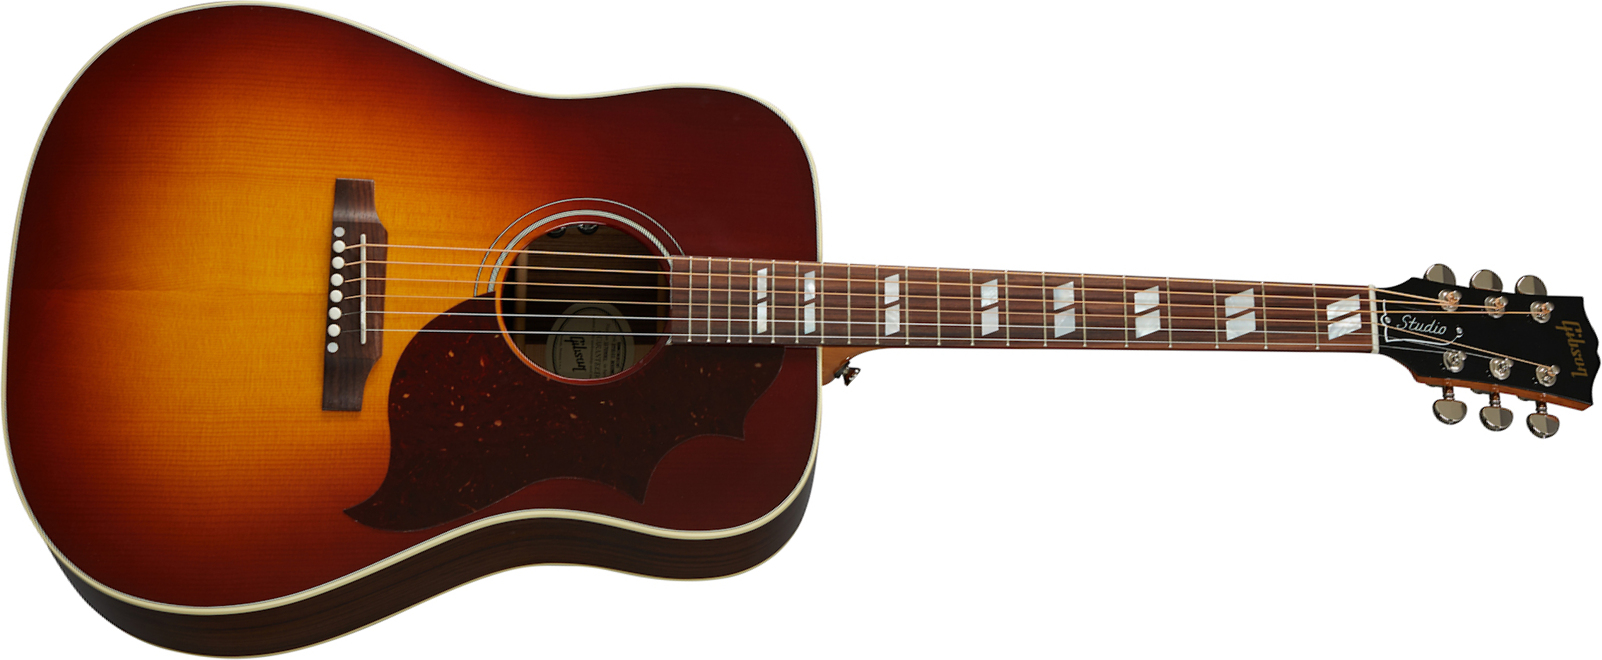 Gibson Hummingbird Studio Rosewood Modern 2020 Dreadnought Epicea Palissandre Rw - Rosewood Burst - Guitare Electro Acoustique - Main picture